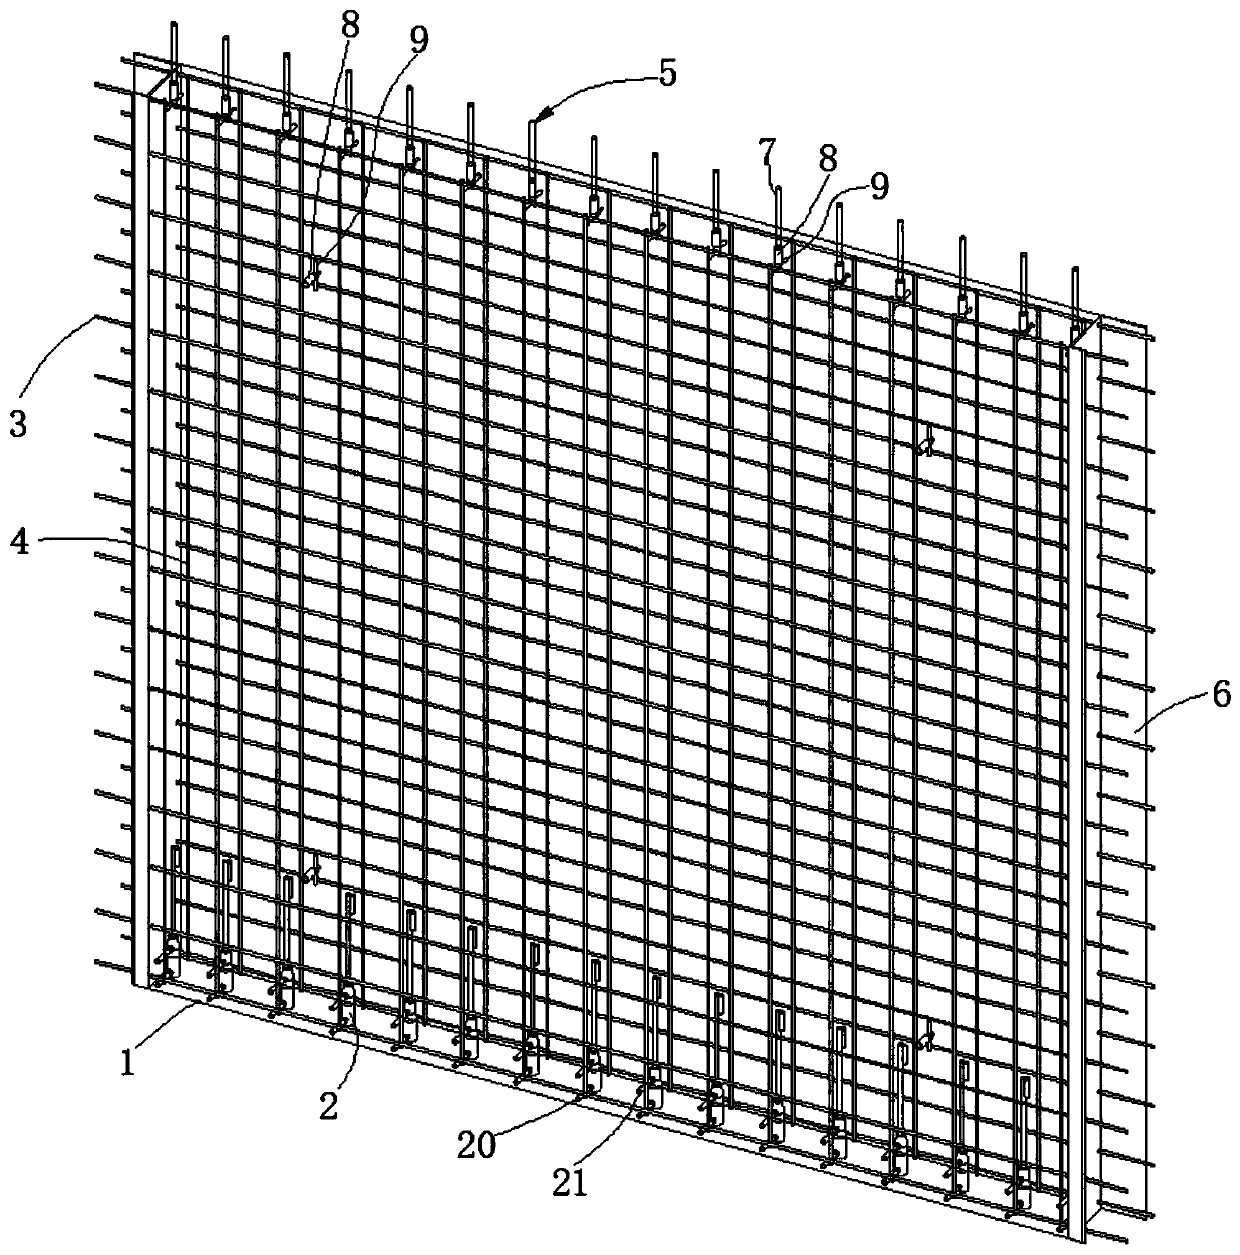 Assembled standard layer module and standard layer construction method combining dry and wet processes